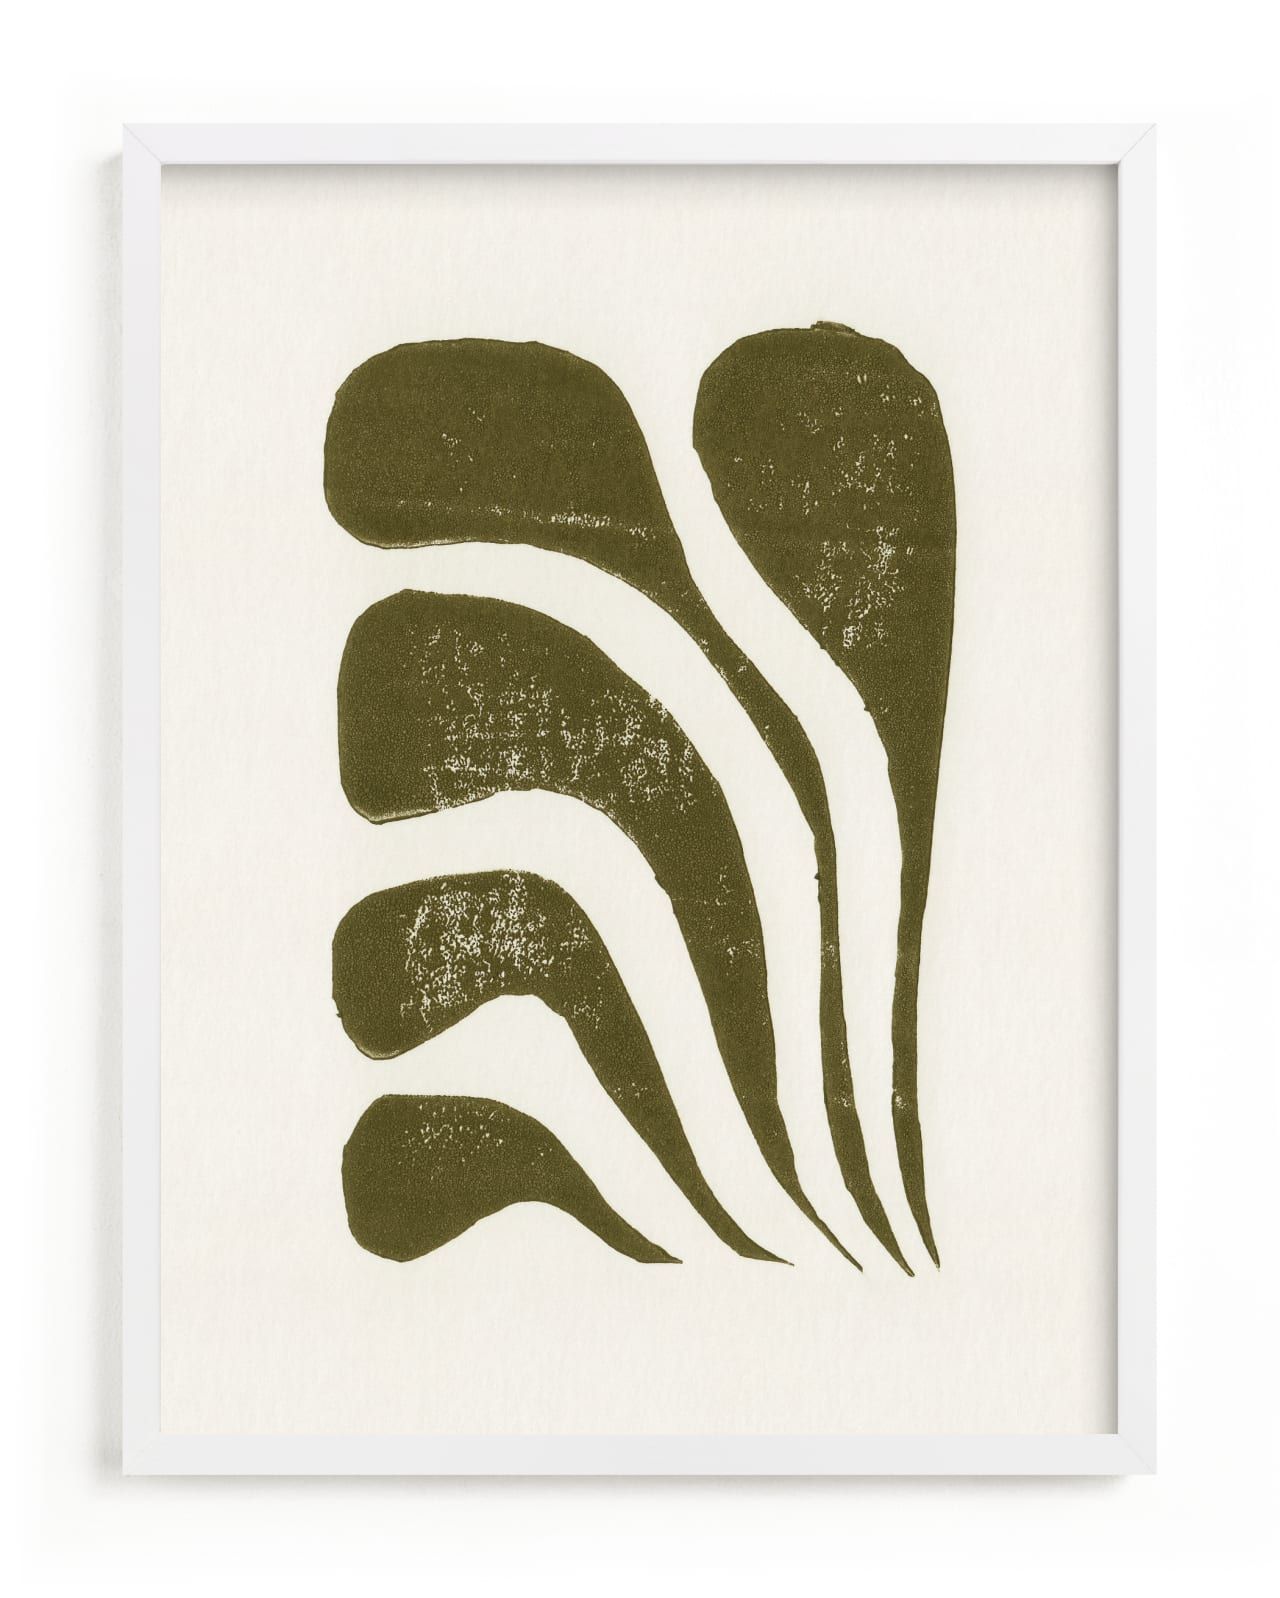 "Growth I" - Graphic Limited Edition Art Print by Alisa Galitsyna. | Minted